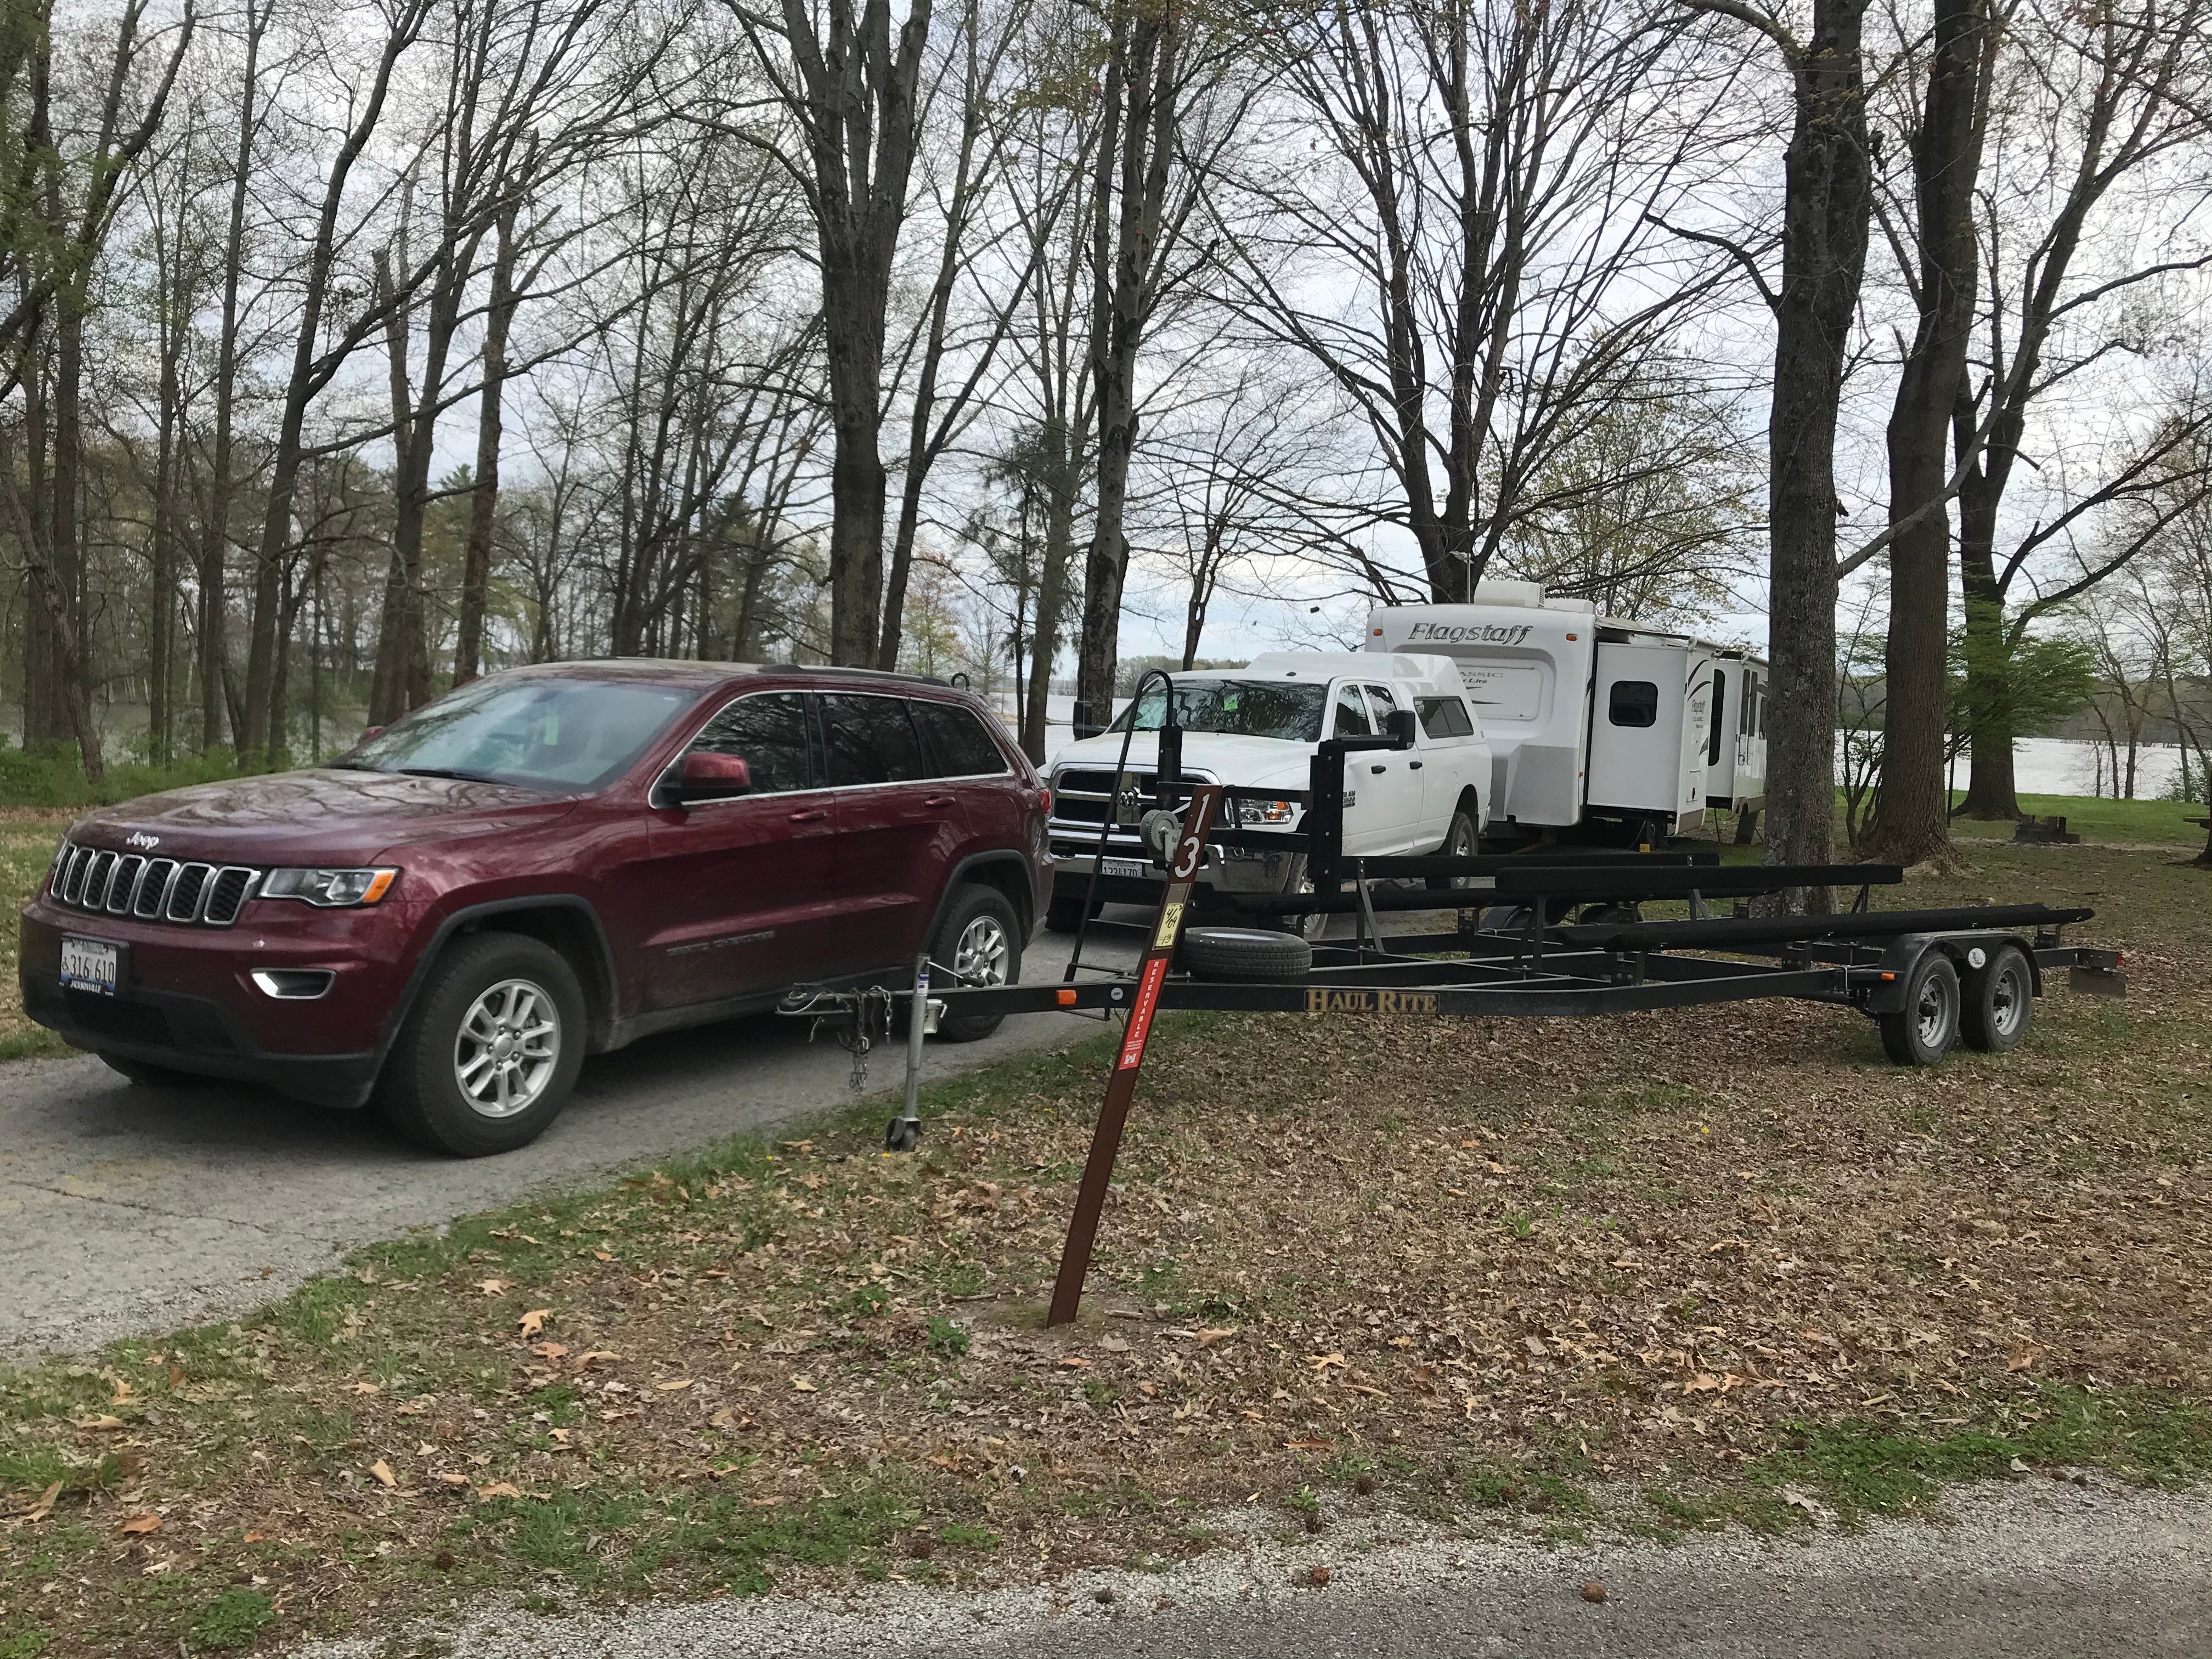 Camper submitted image from COE Rend Lake North Sandusky Recreation Area - 4